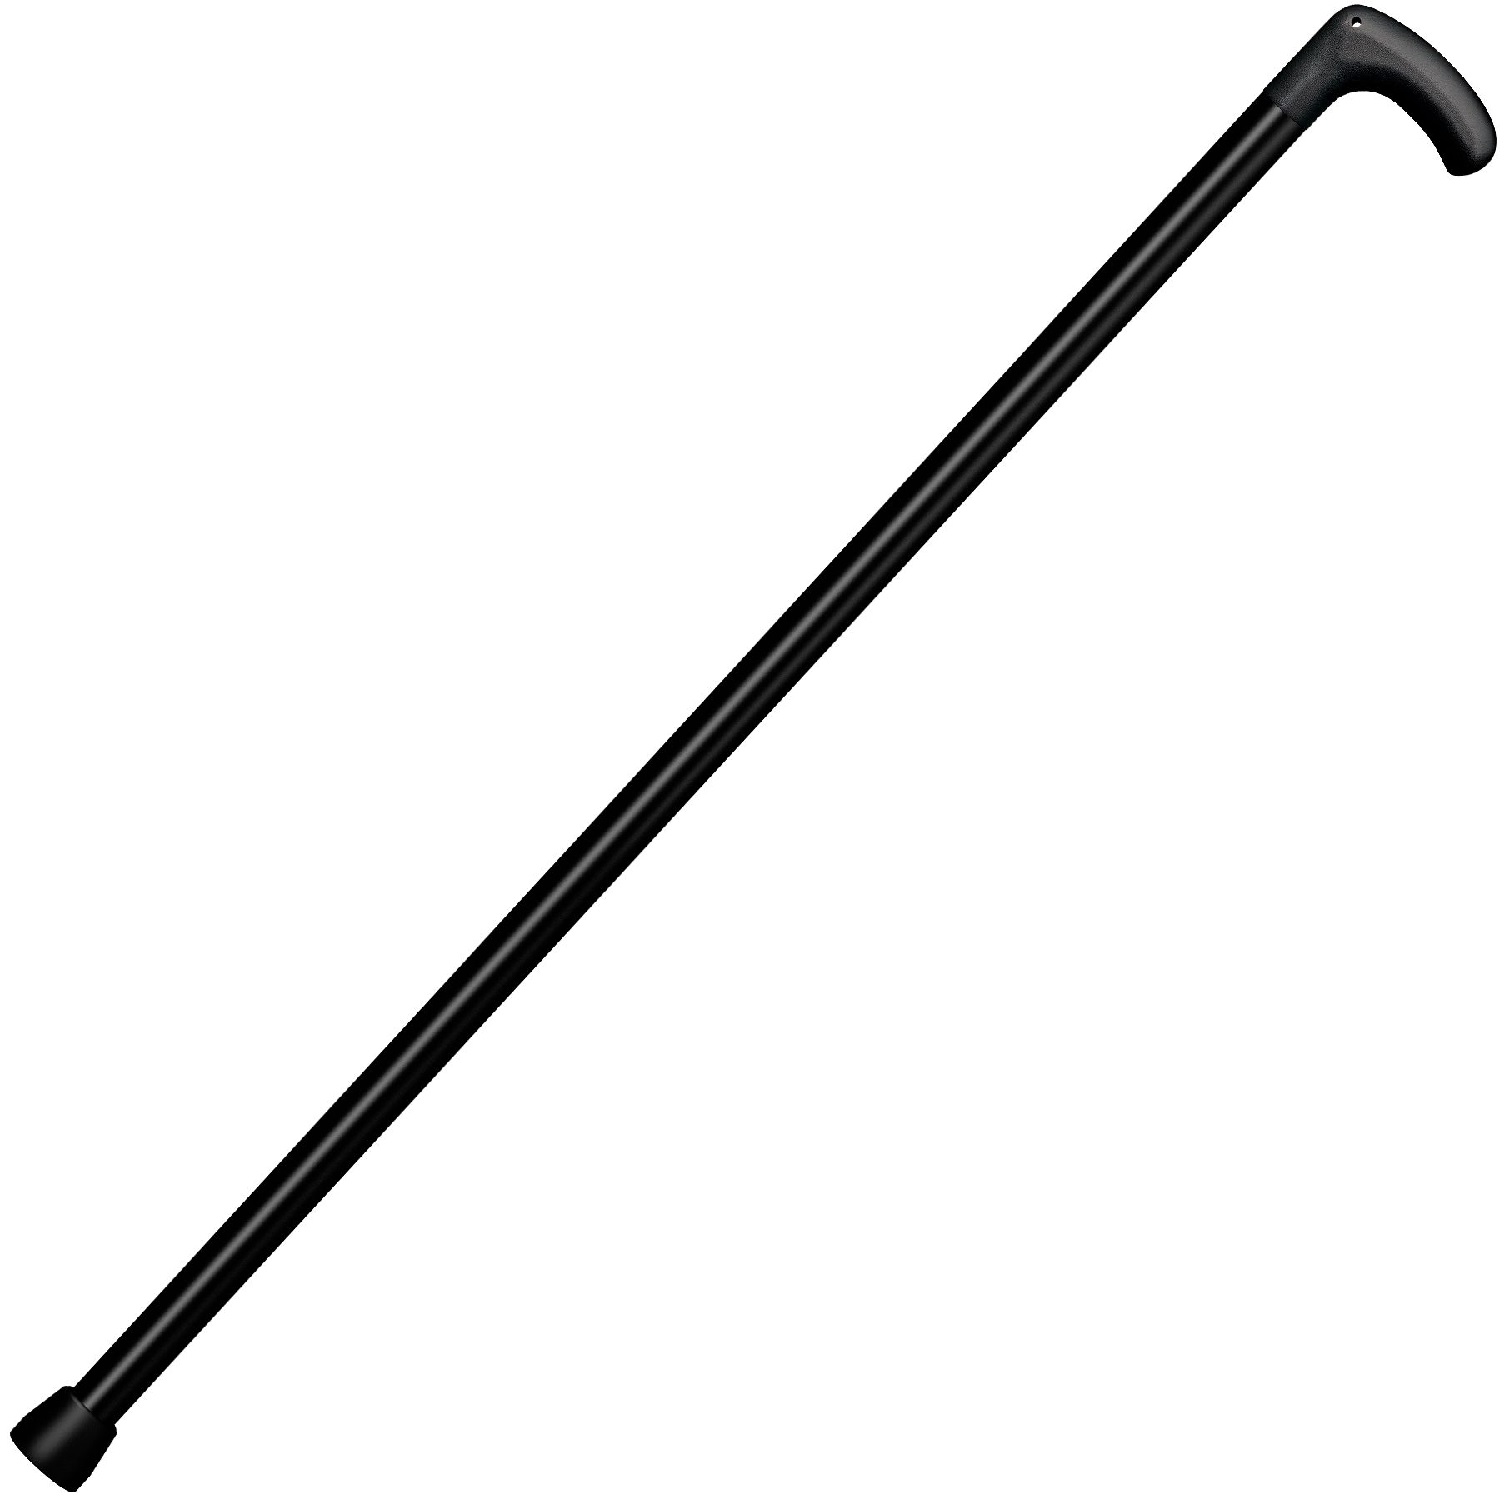 Cold Steel Heavy Duty Cane 37.5 in Overall Length